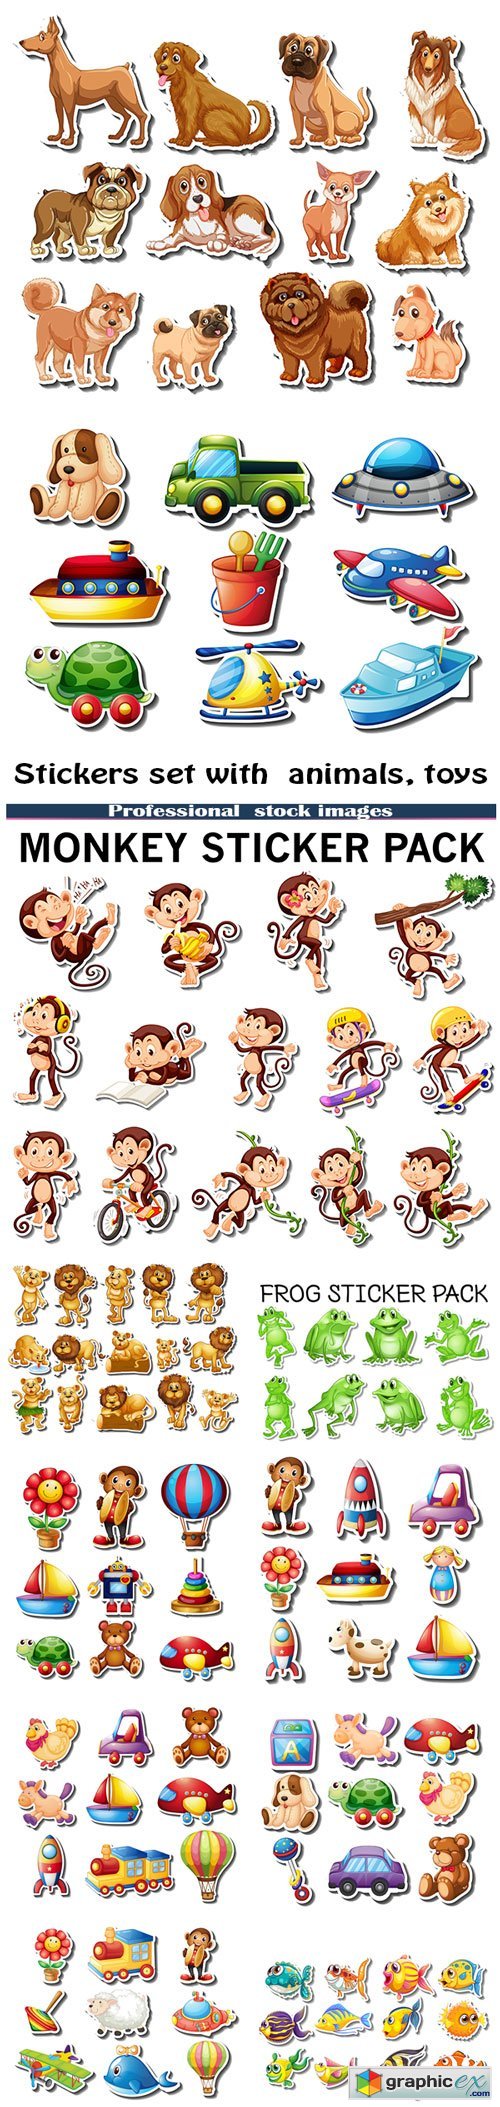 Stickers set with animals, toys